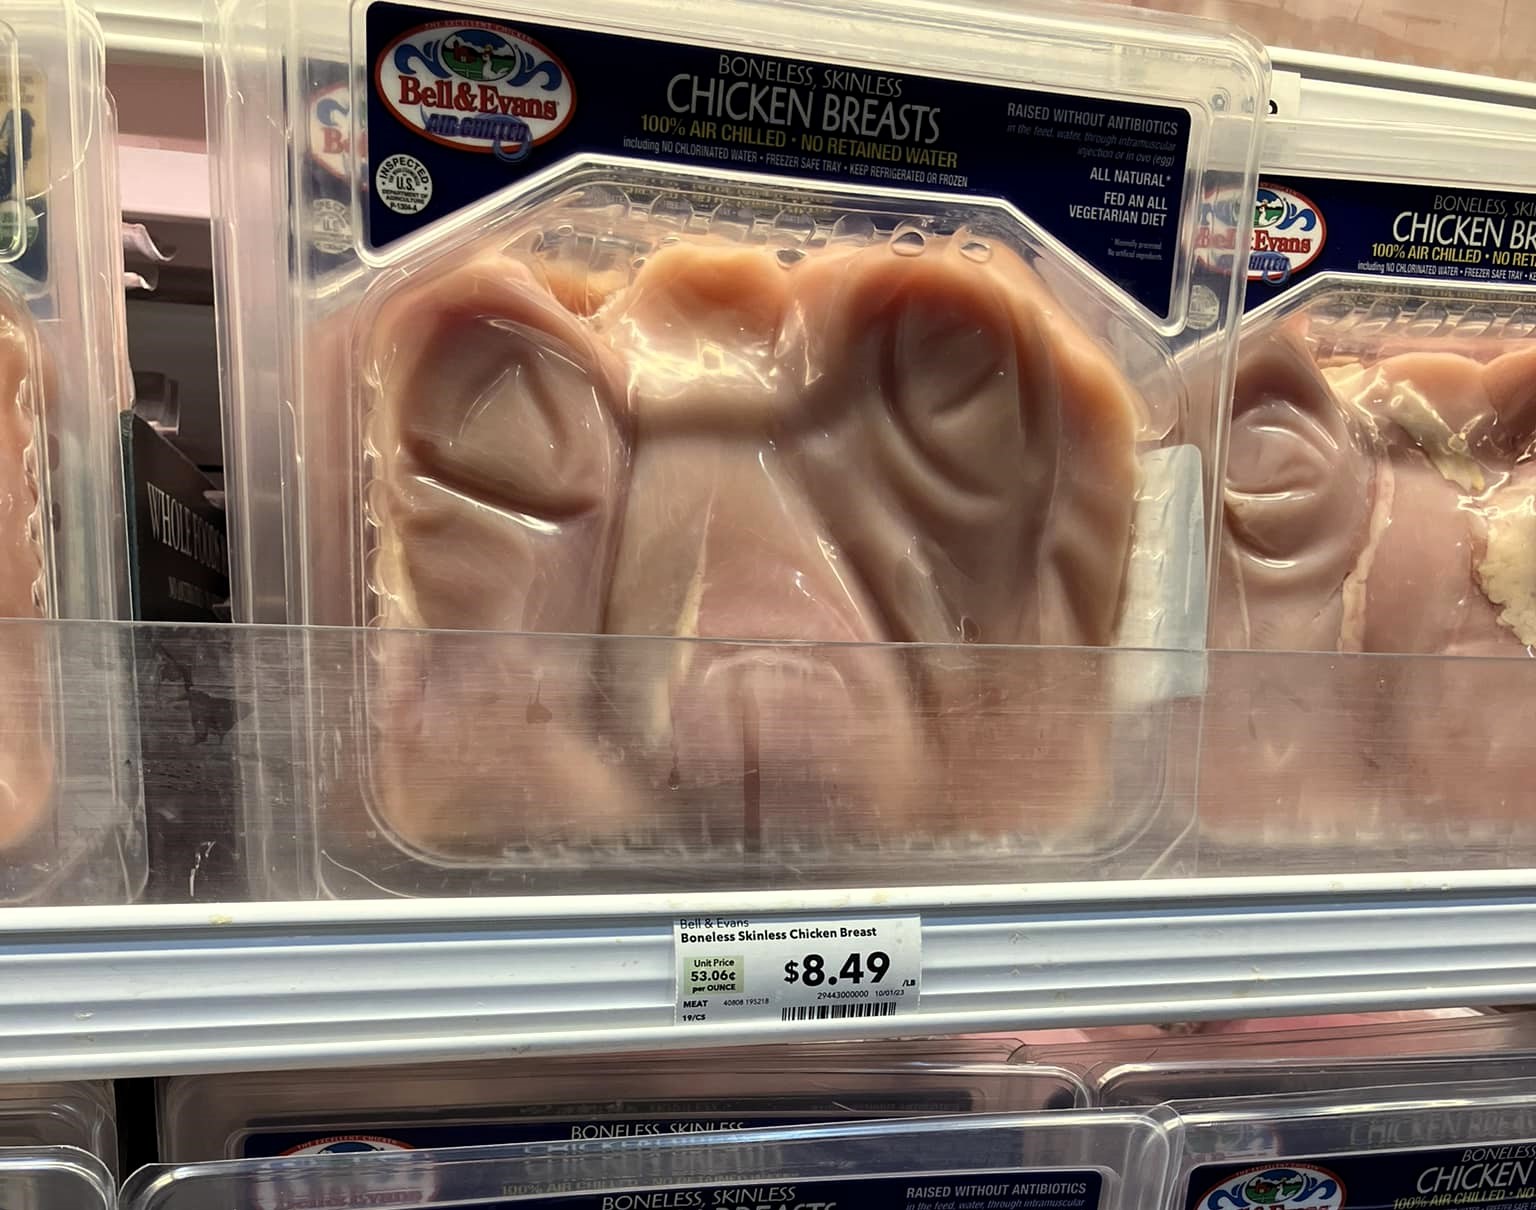 Chicken breasts in a US supermarket bear an uncanny resemblance to E.T., prompting amusement and movie references among shoppers.